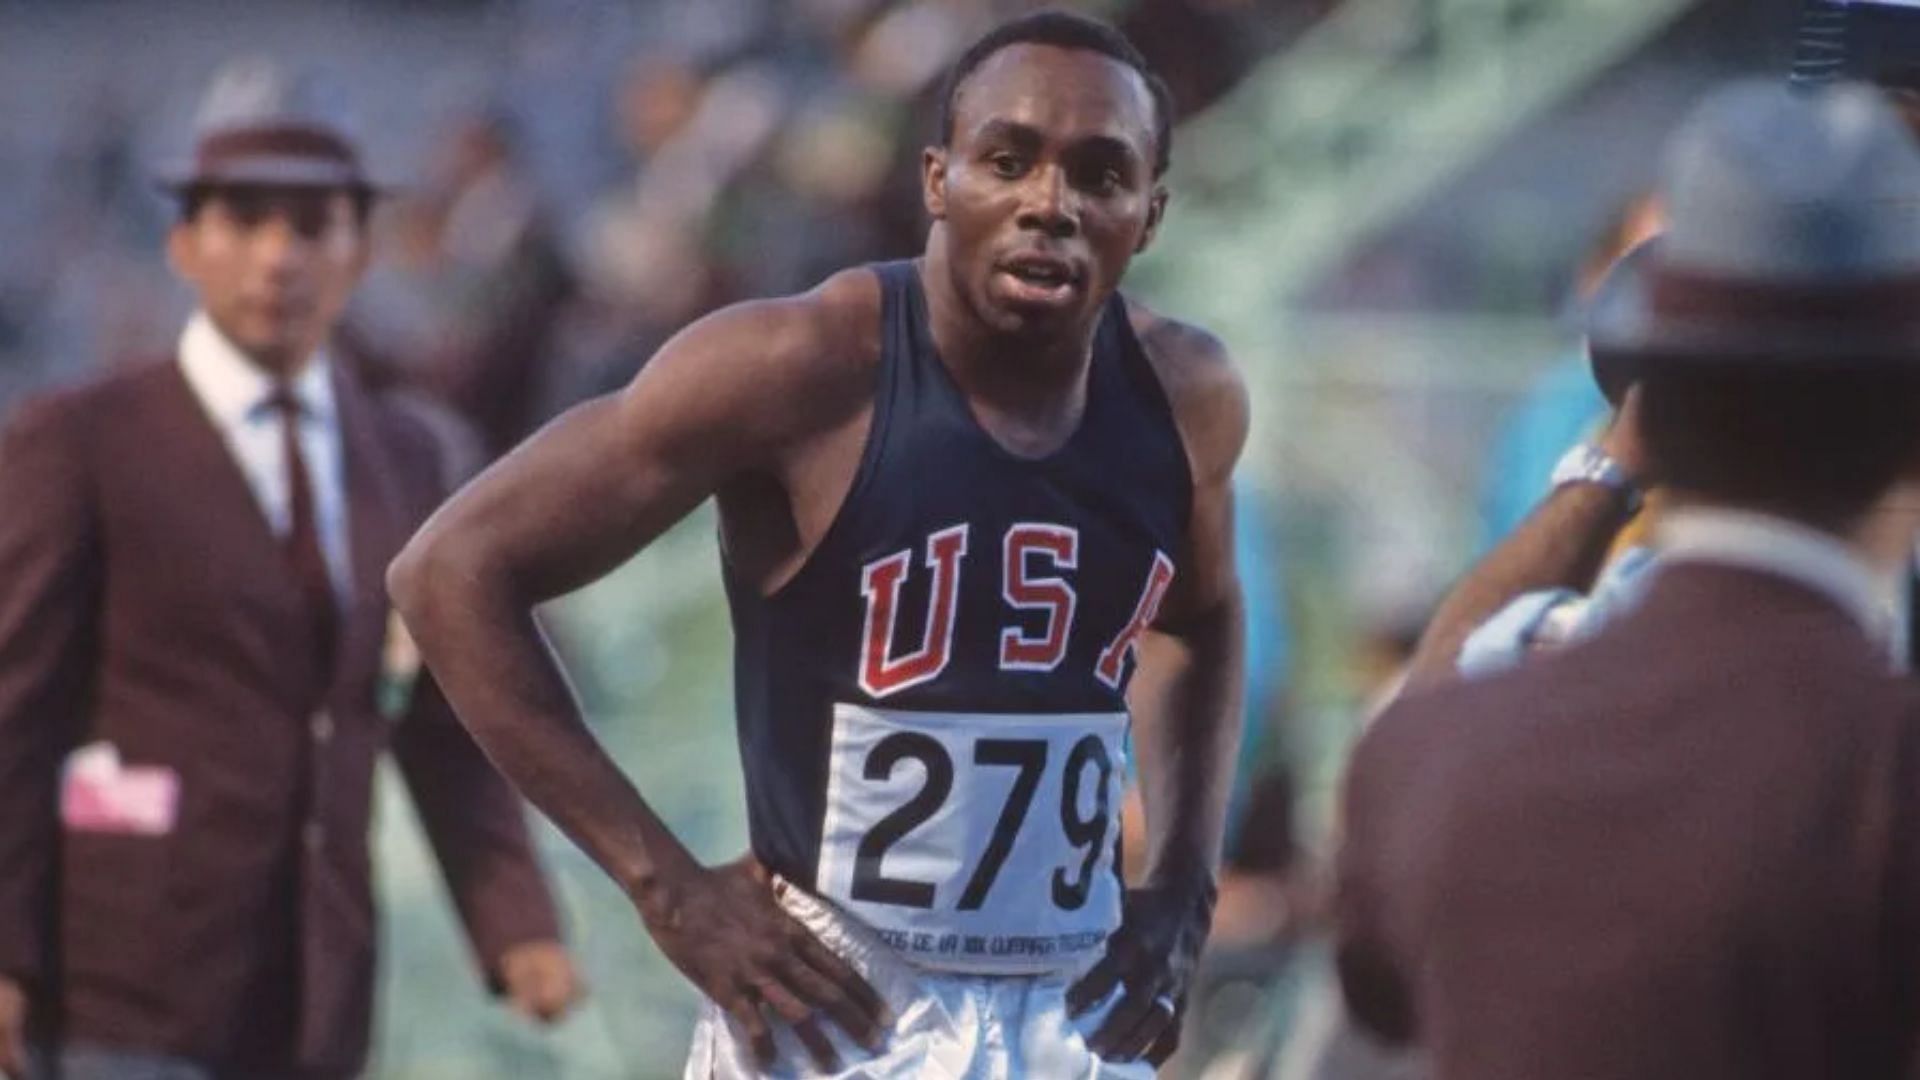 Jim Hines is the first athlete to break the ten-second barrier in the 100-meter dash. (Image credit: Getty Images)